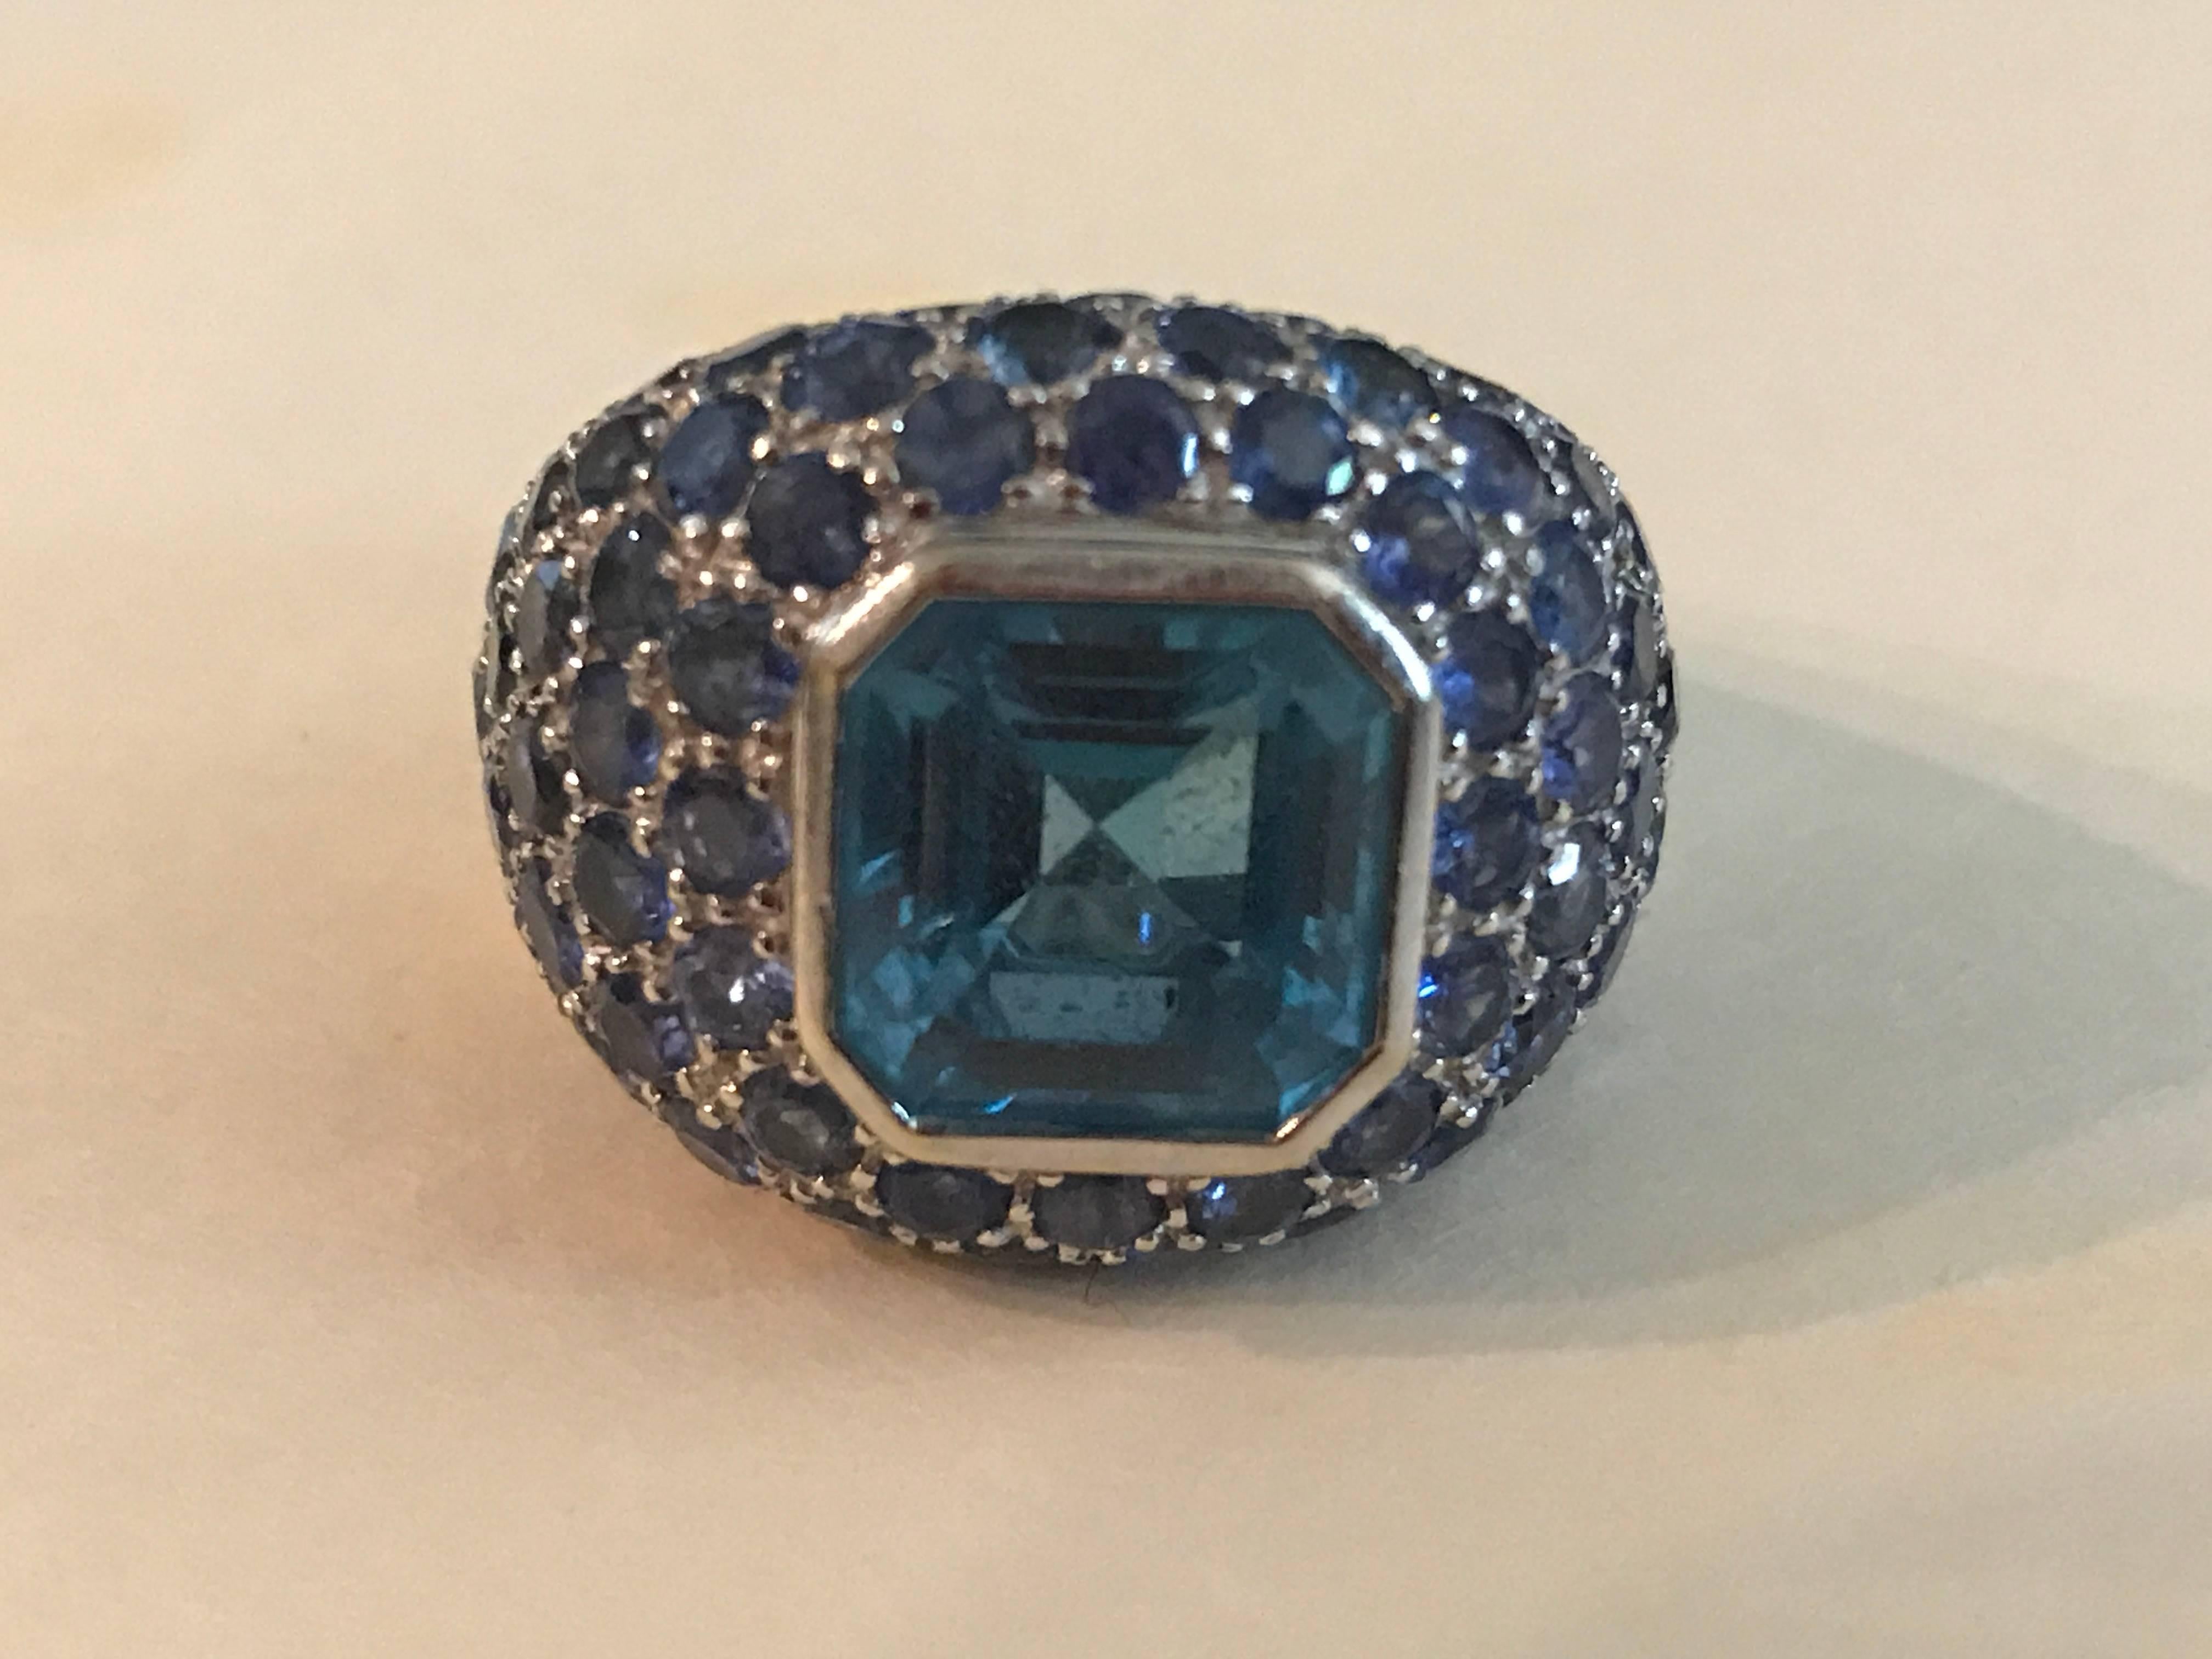 18K white gold dome ring with a bezel set blue topaz in the center. The mounting contains pave set blue sapphires. 